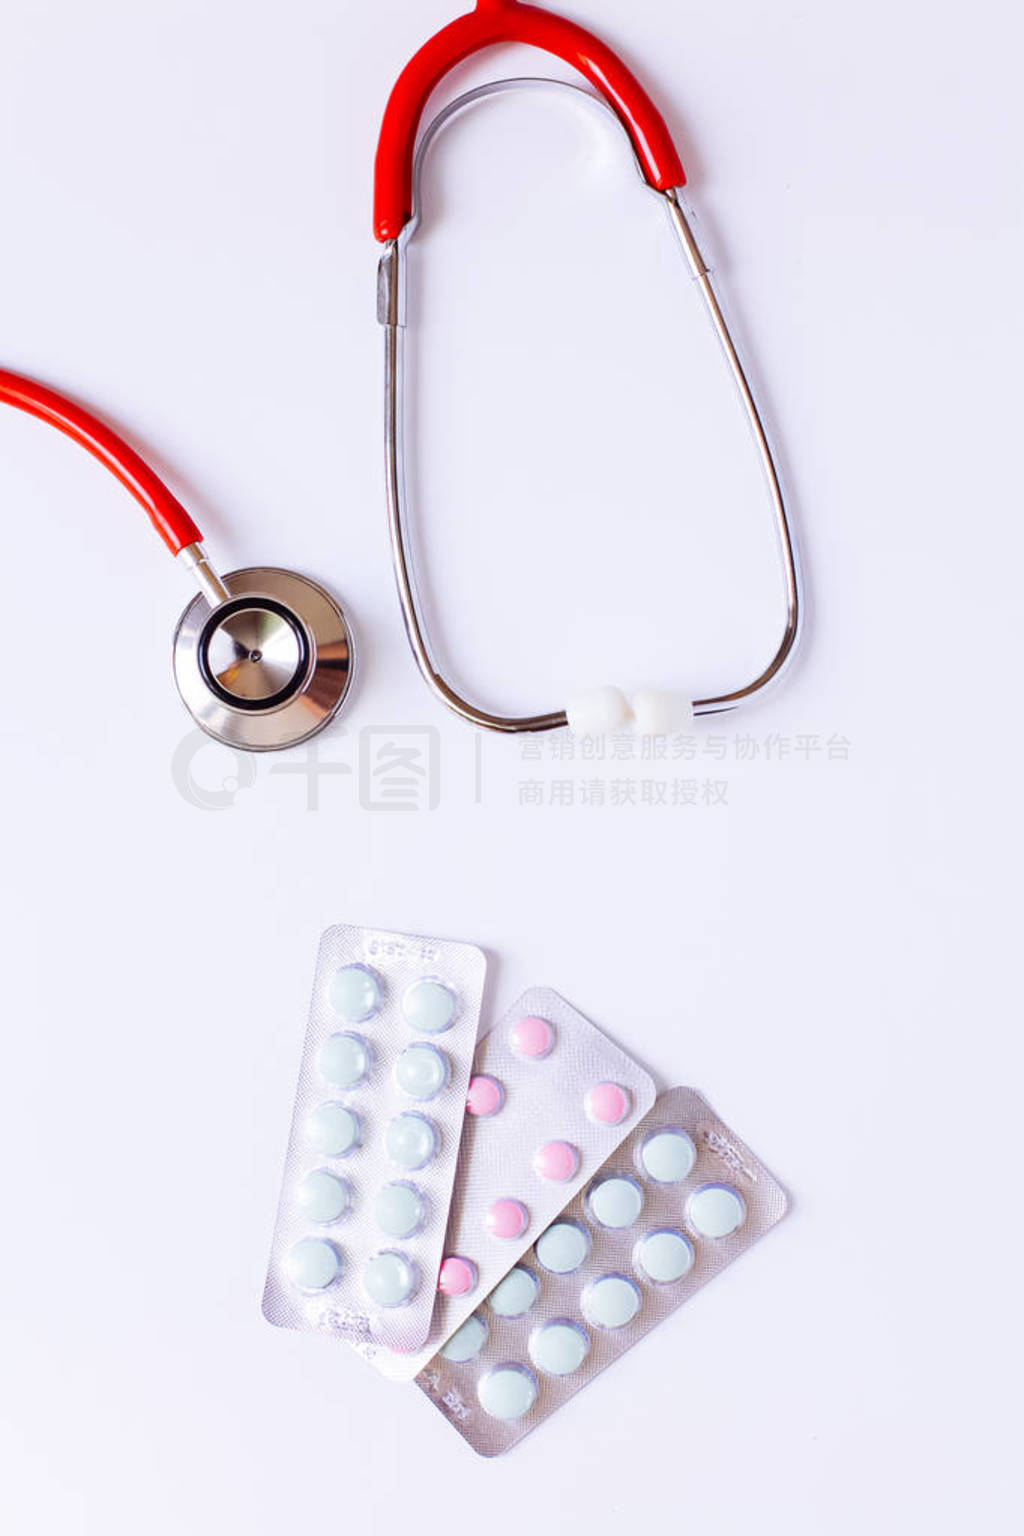 stethoscope for doctor checkup with pills on medical laboratory